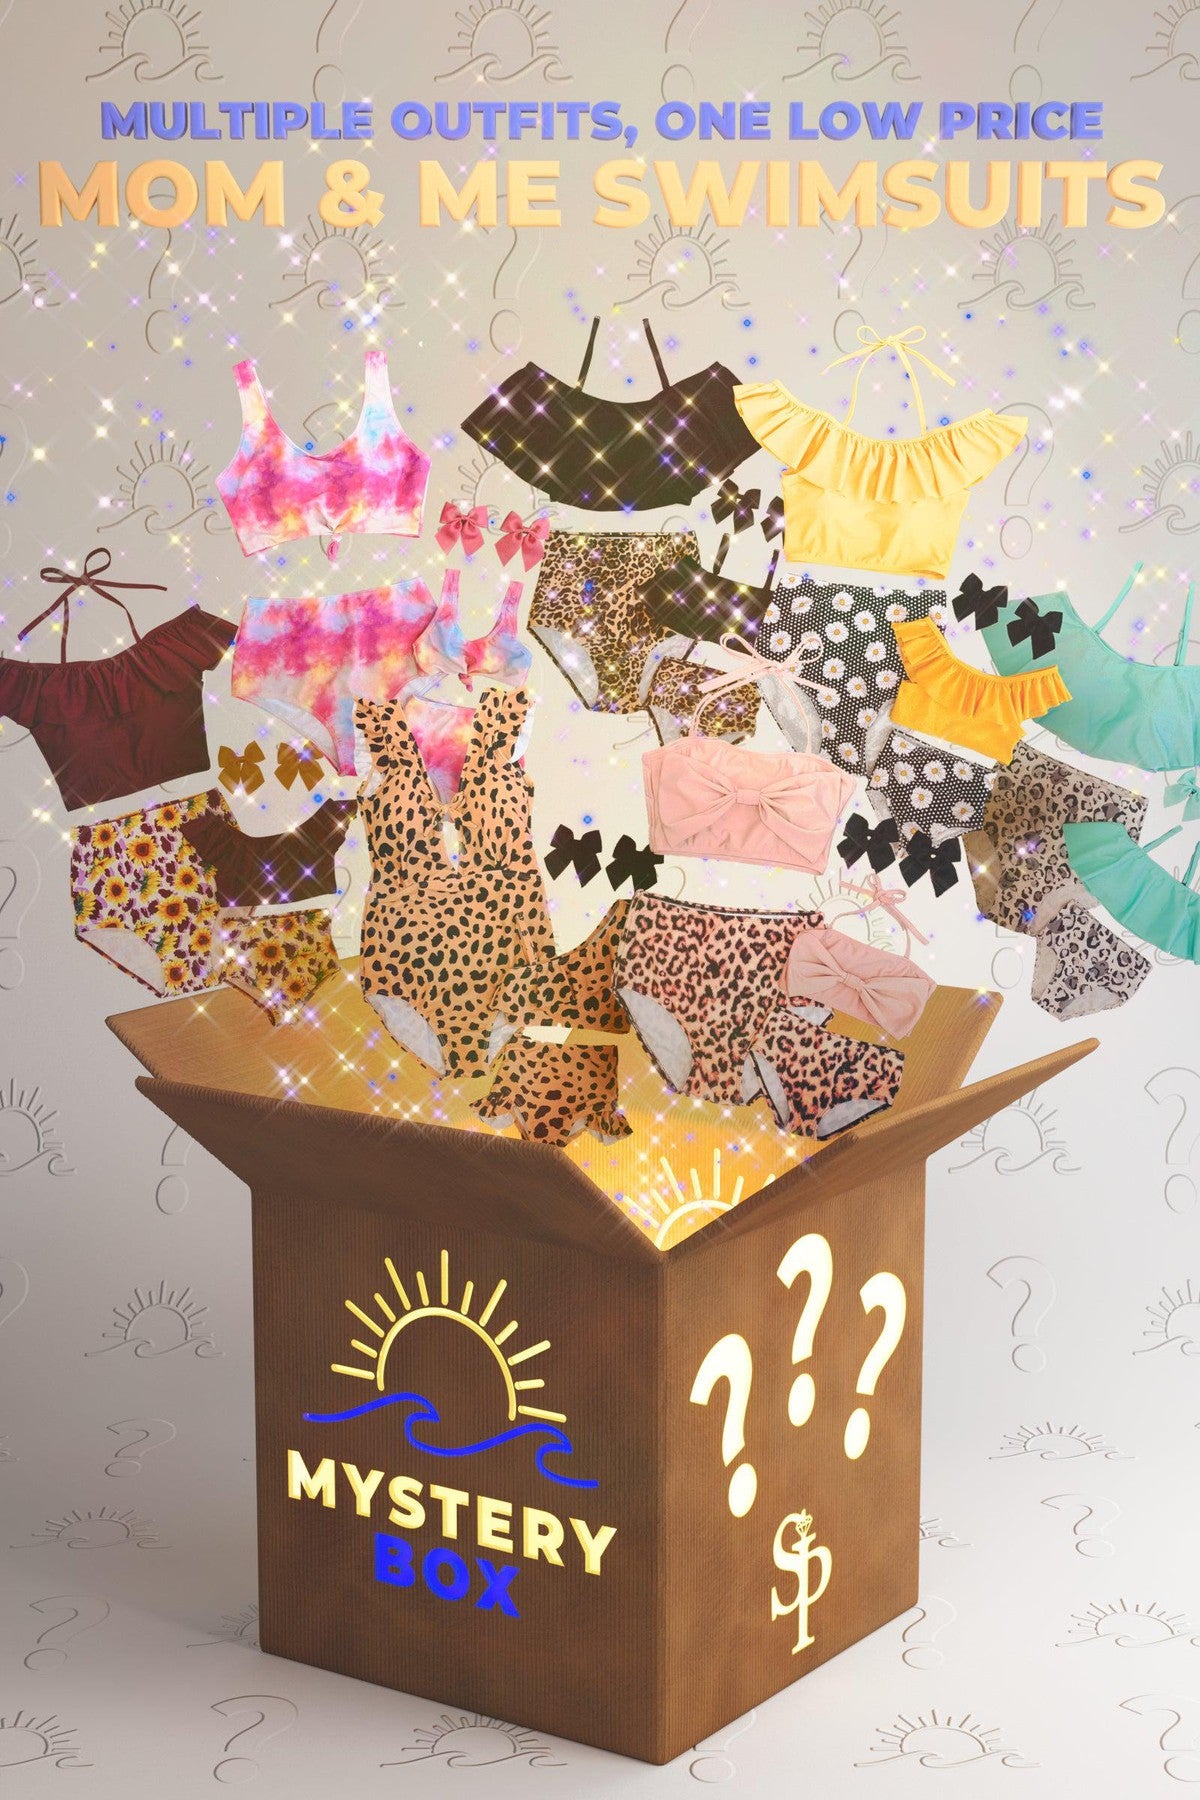 Mom & Me - Swimsuit Mystery Boxes - Sparkle in Pink